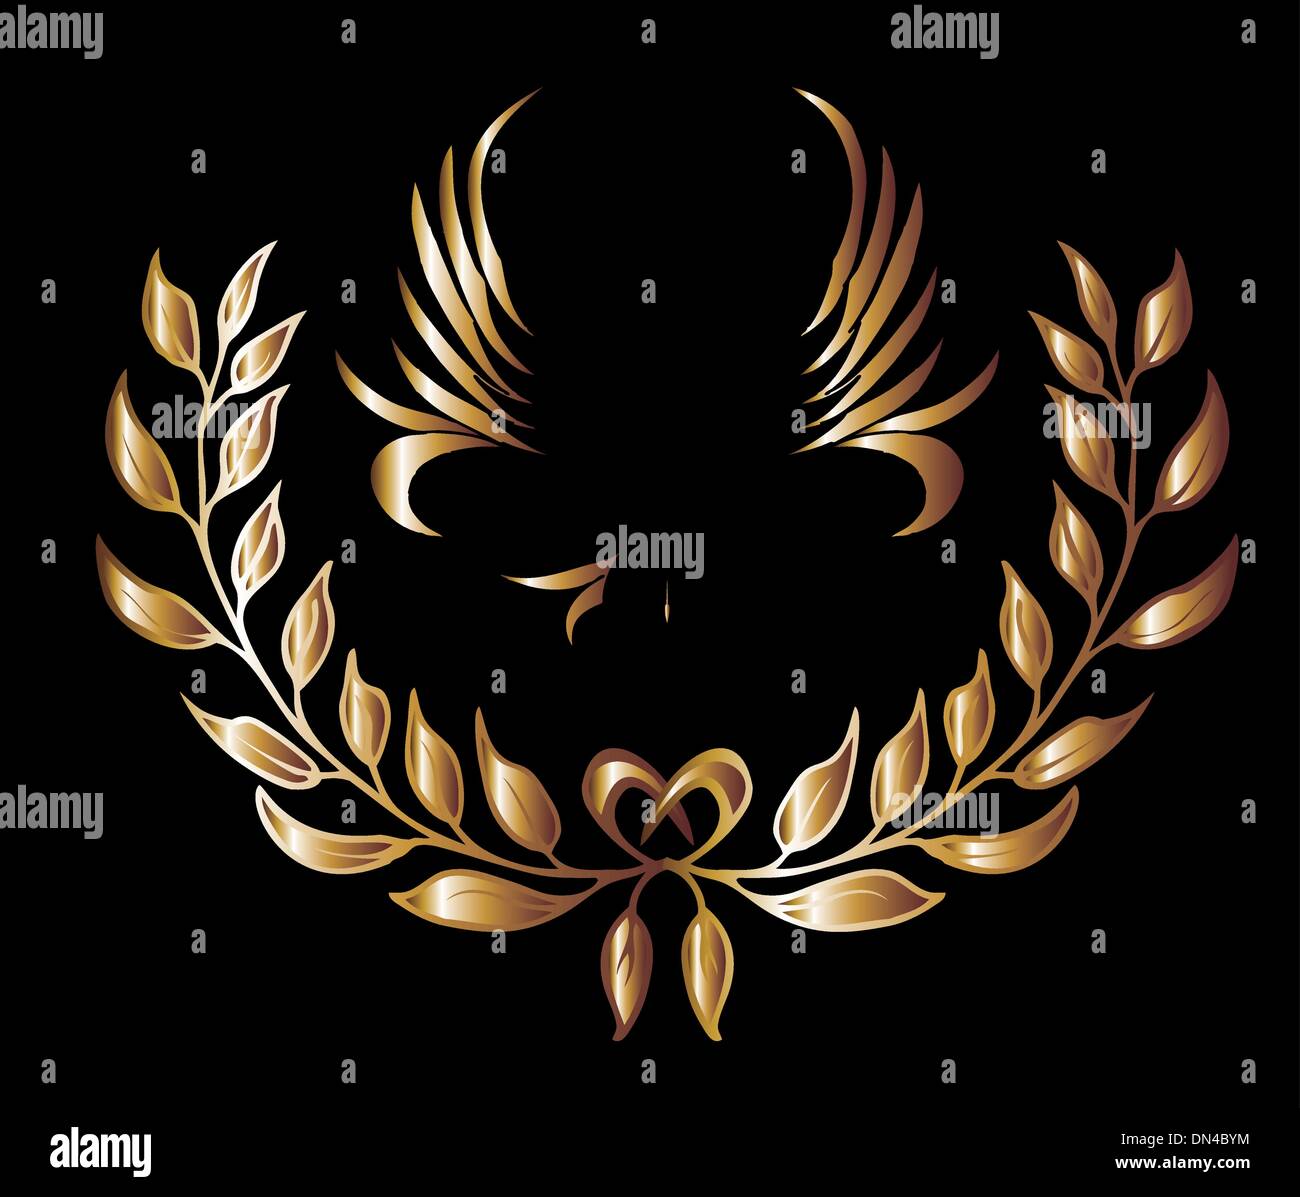 black background gold lion and wreath vector art Stock Vector